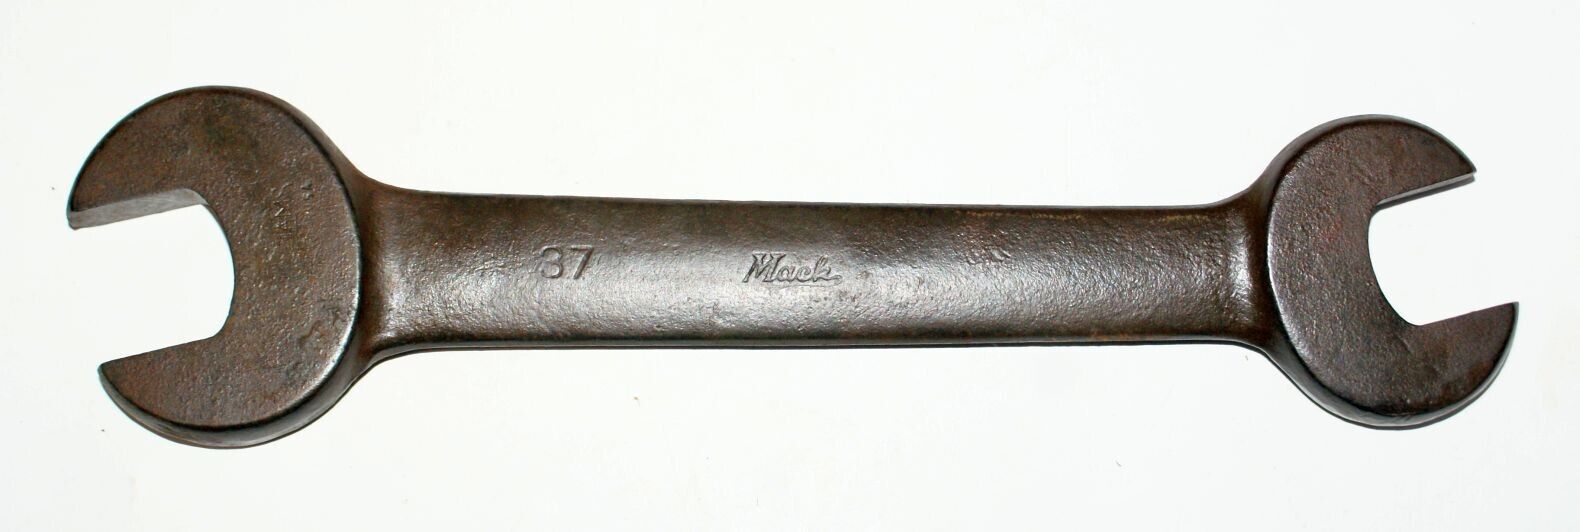 Old Antique Vintage 37 MACK  Wrench Tool Made by Williams 1 1/4\